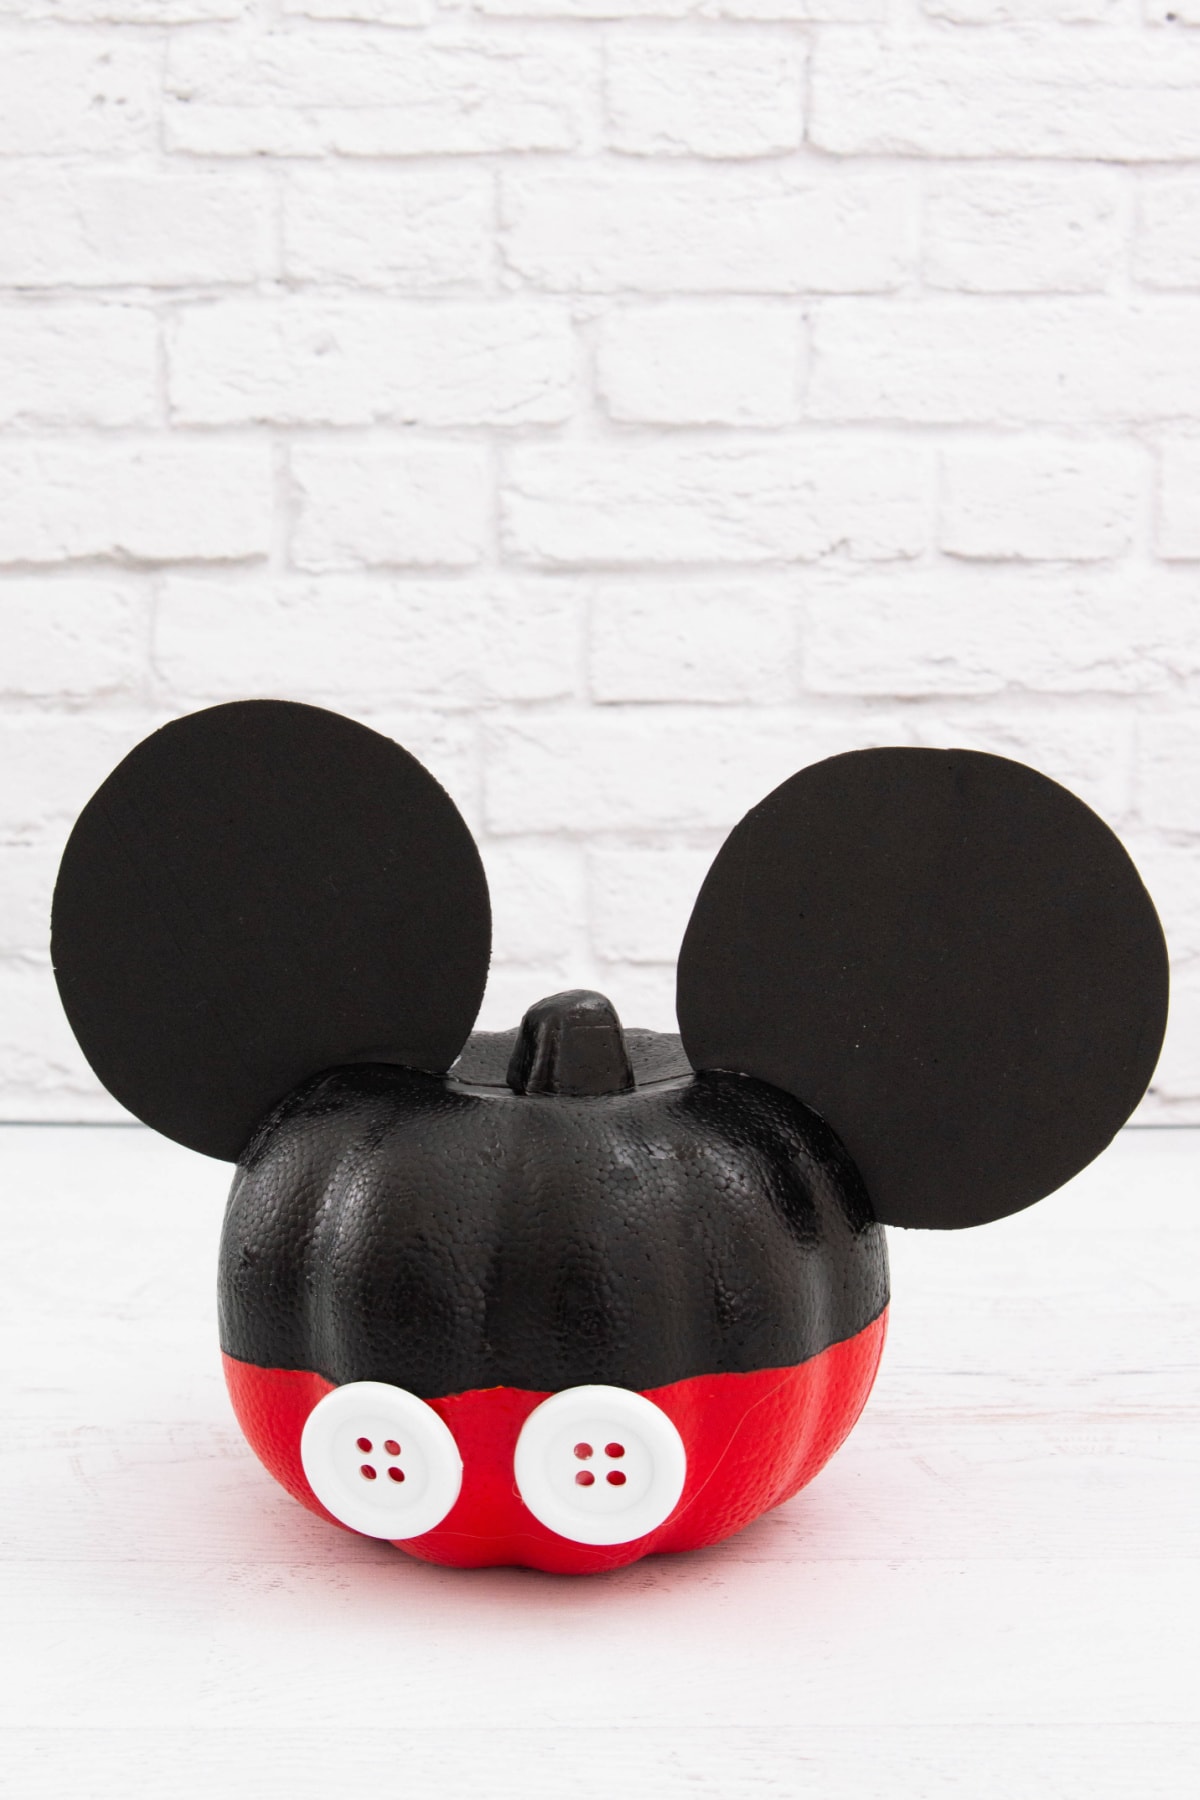 Mickey Mouse Painted Pumpkin with brick background